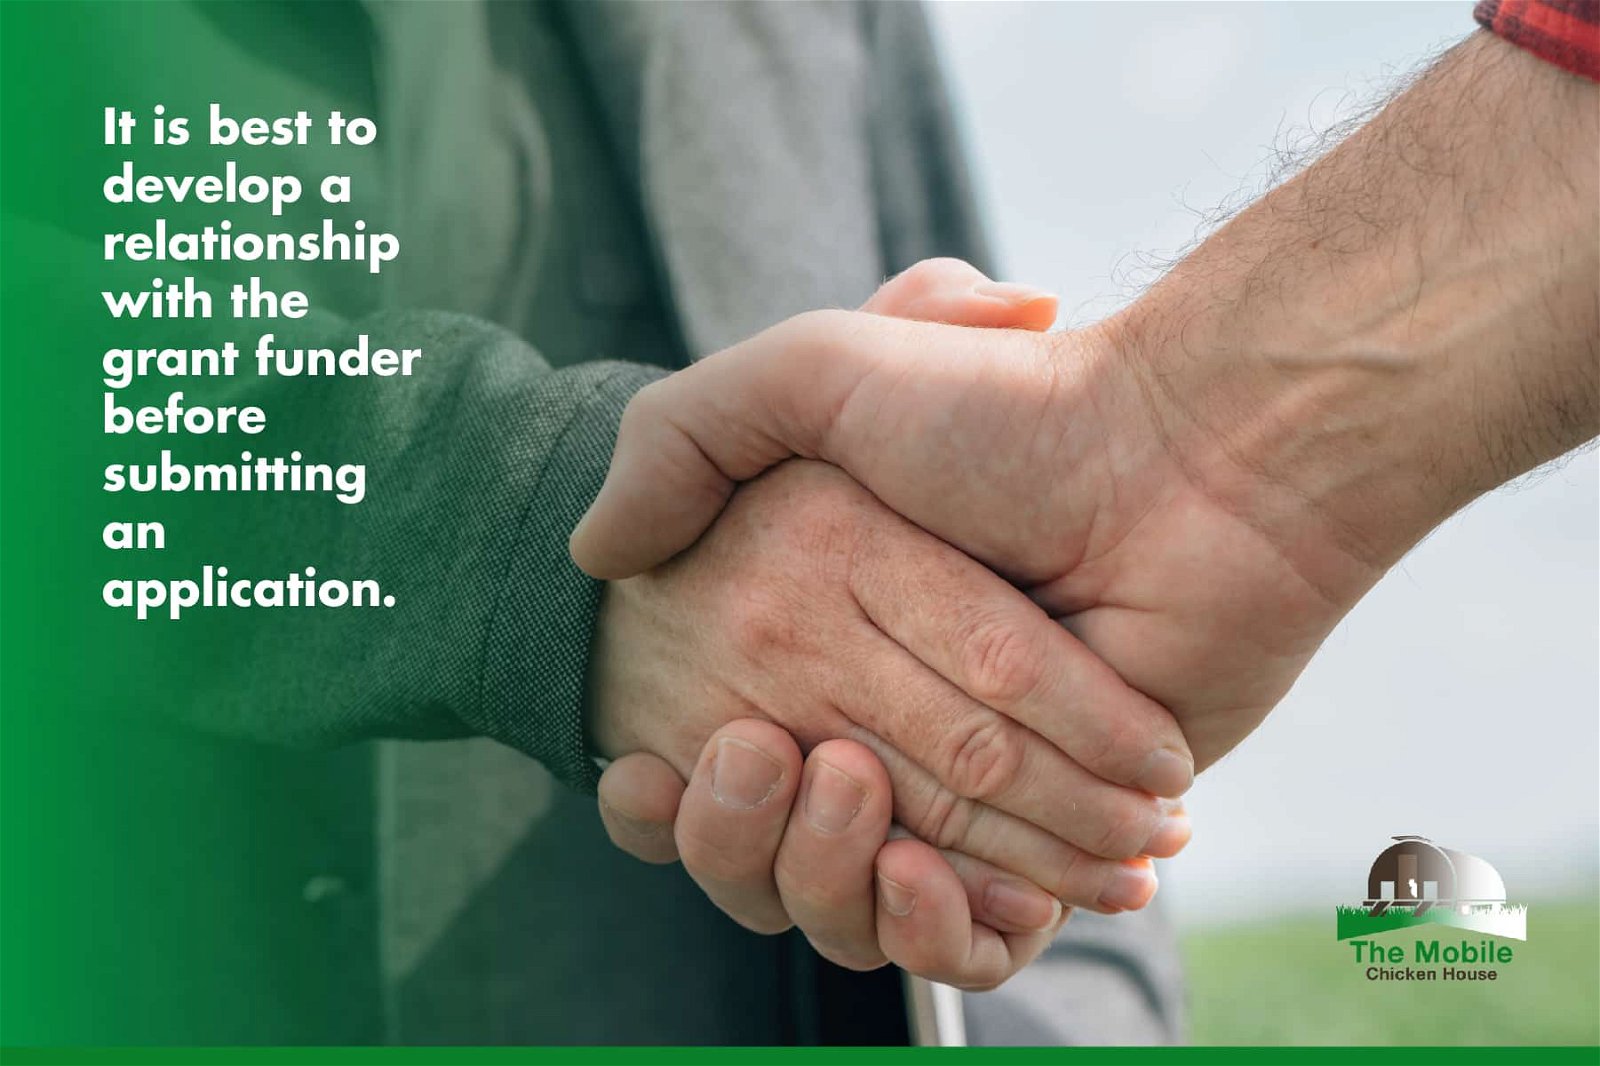 develop a relationship with the grant funder before submitting an application